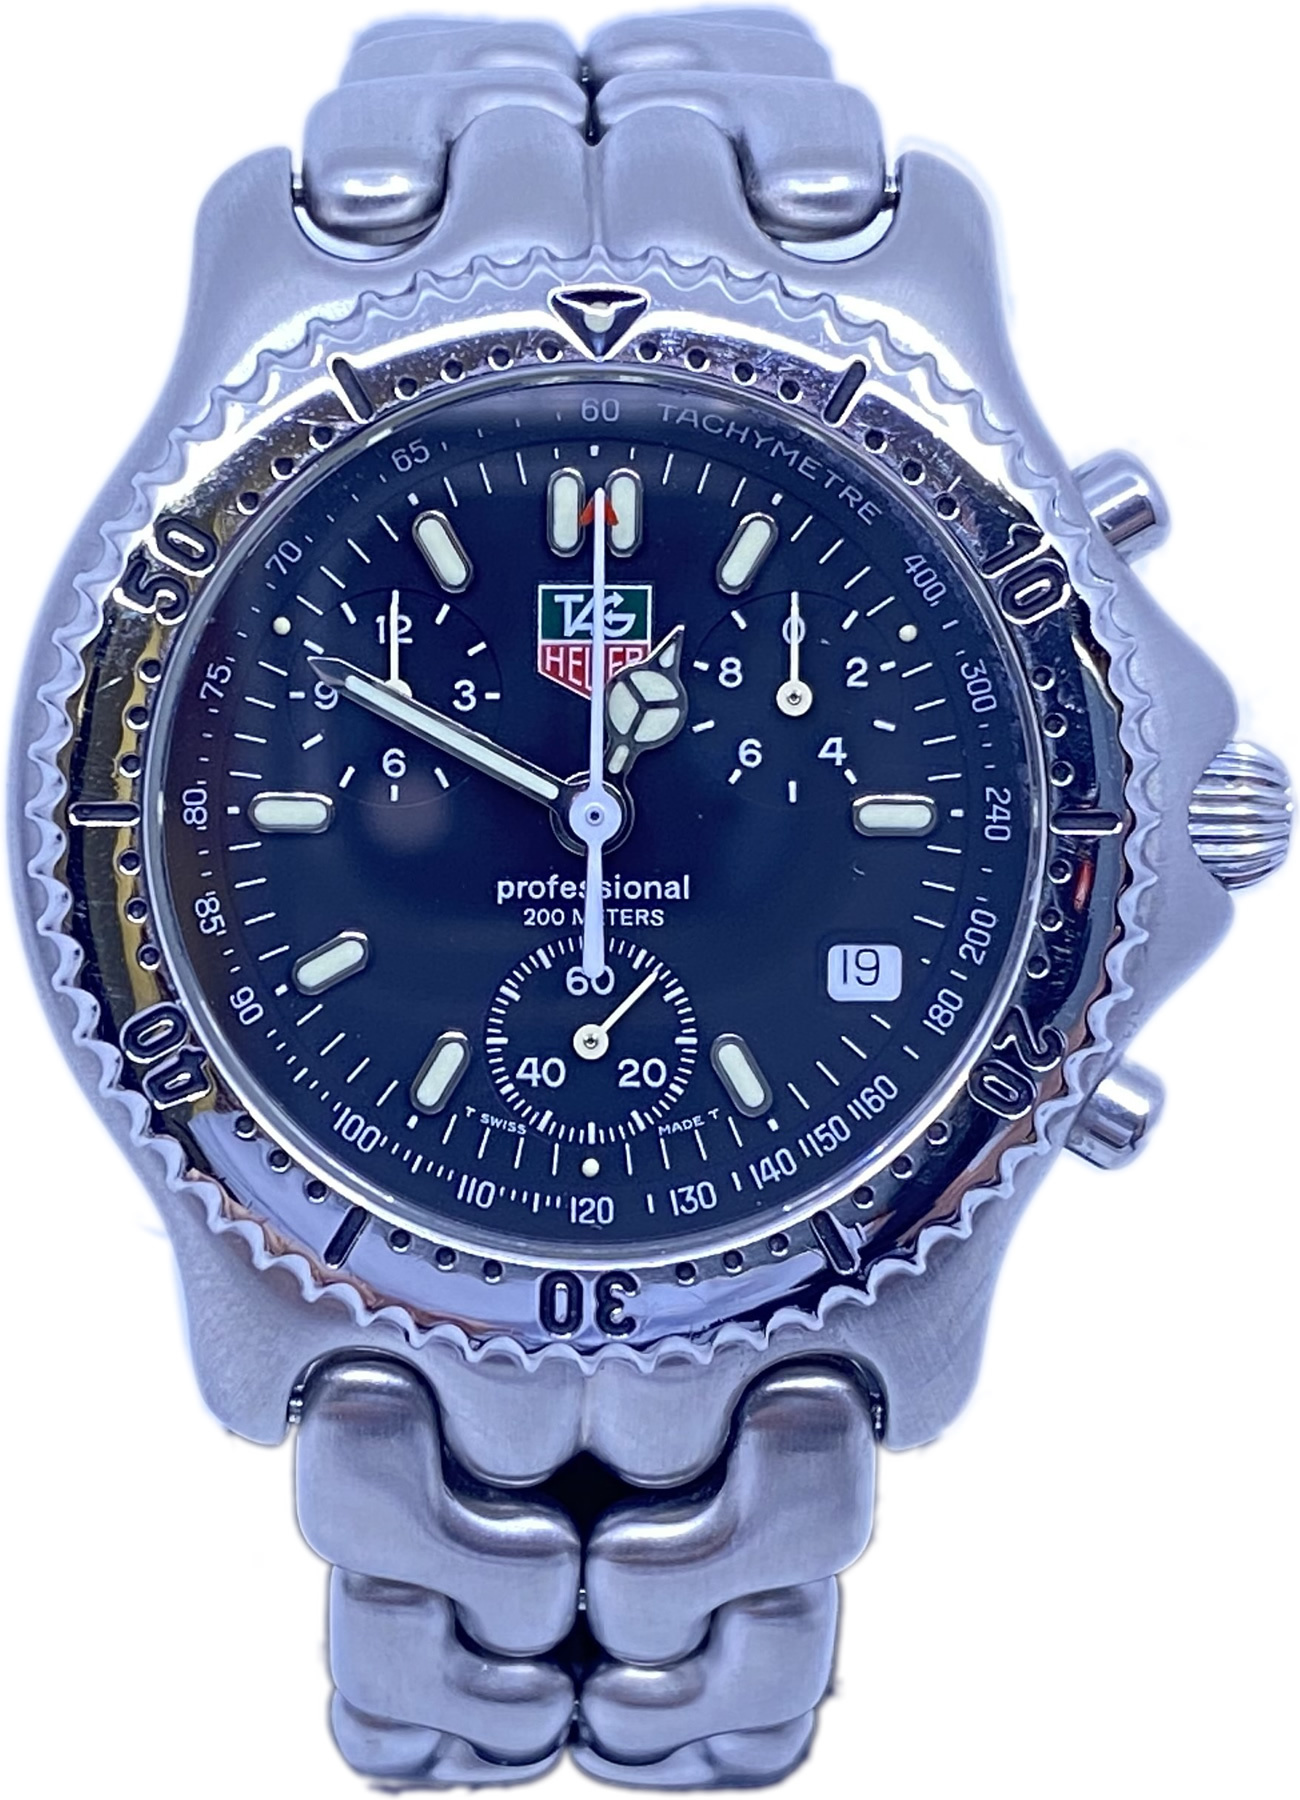 Tag Heuer SEL link Chrono CG1110 - Exquisite Timepieces